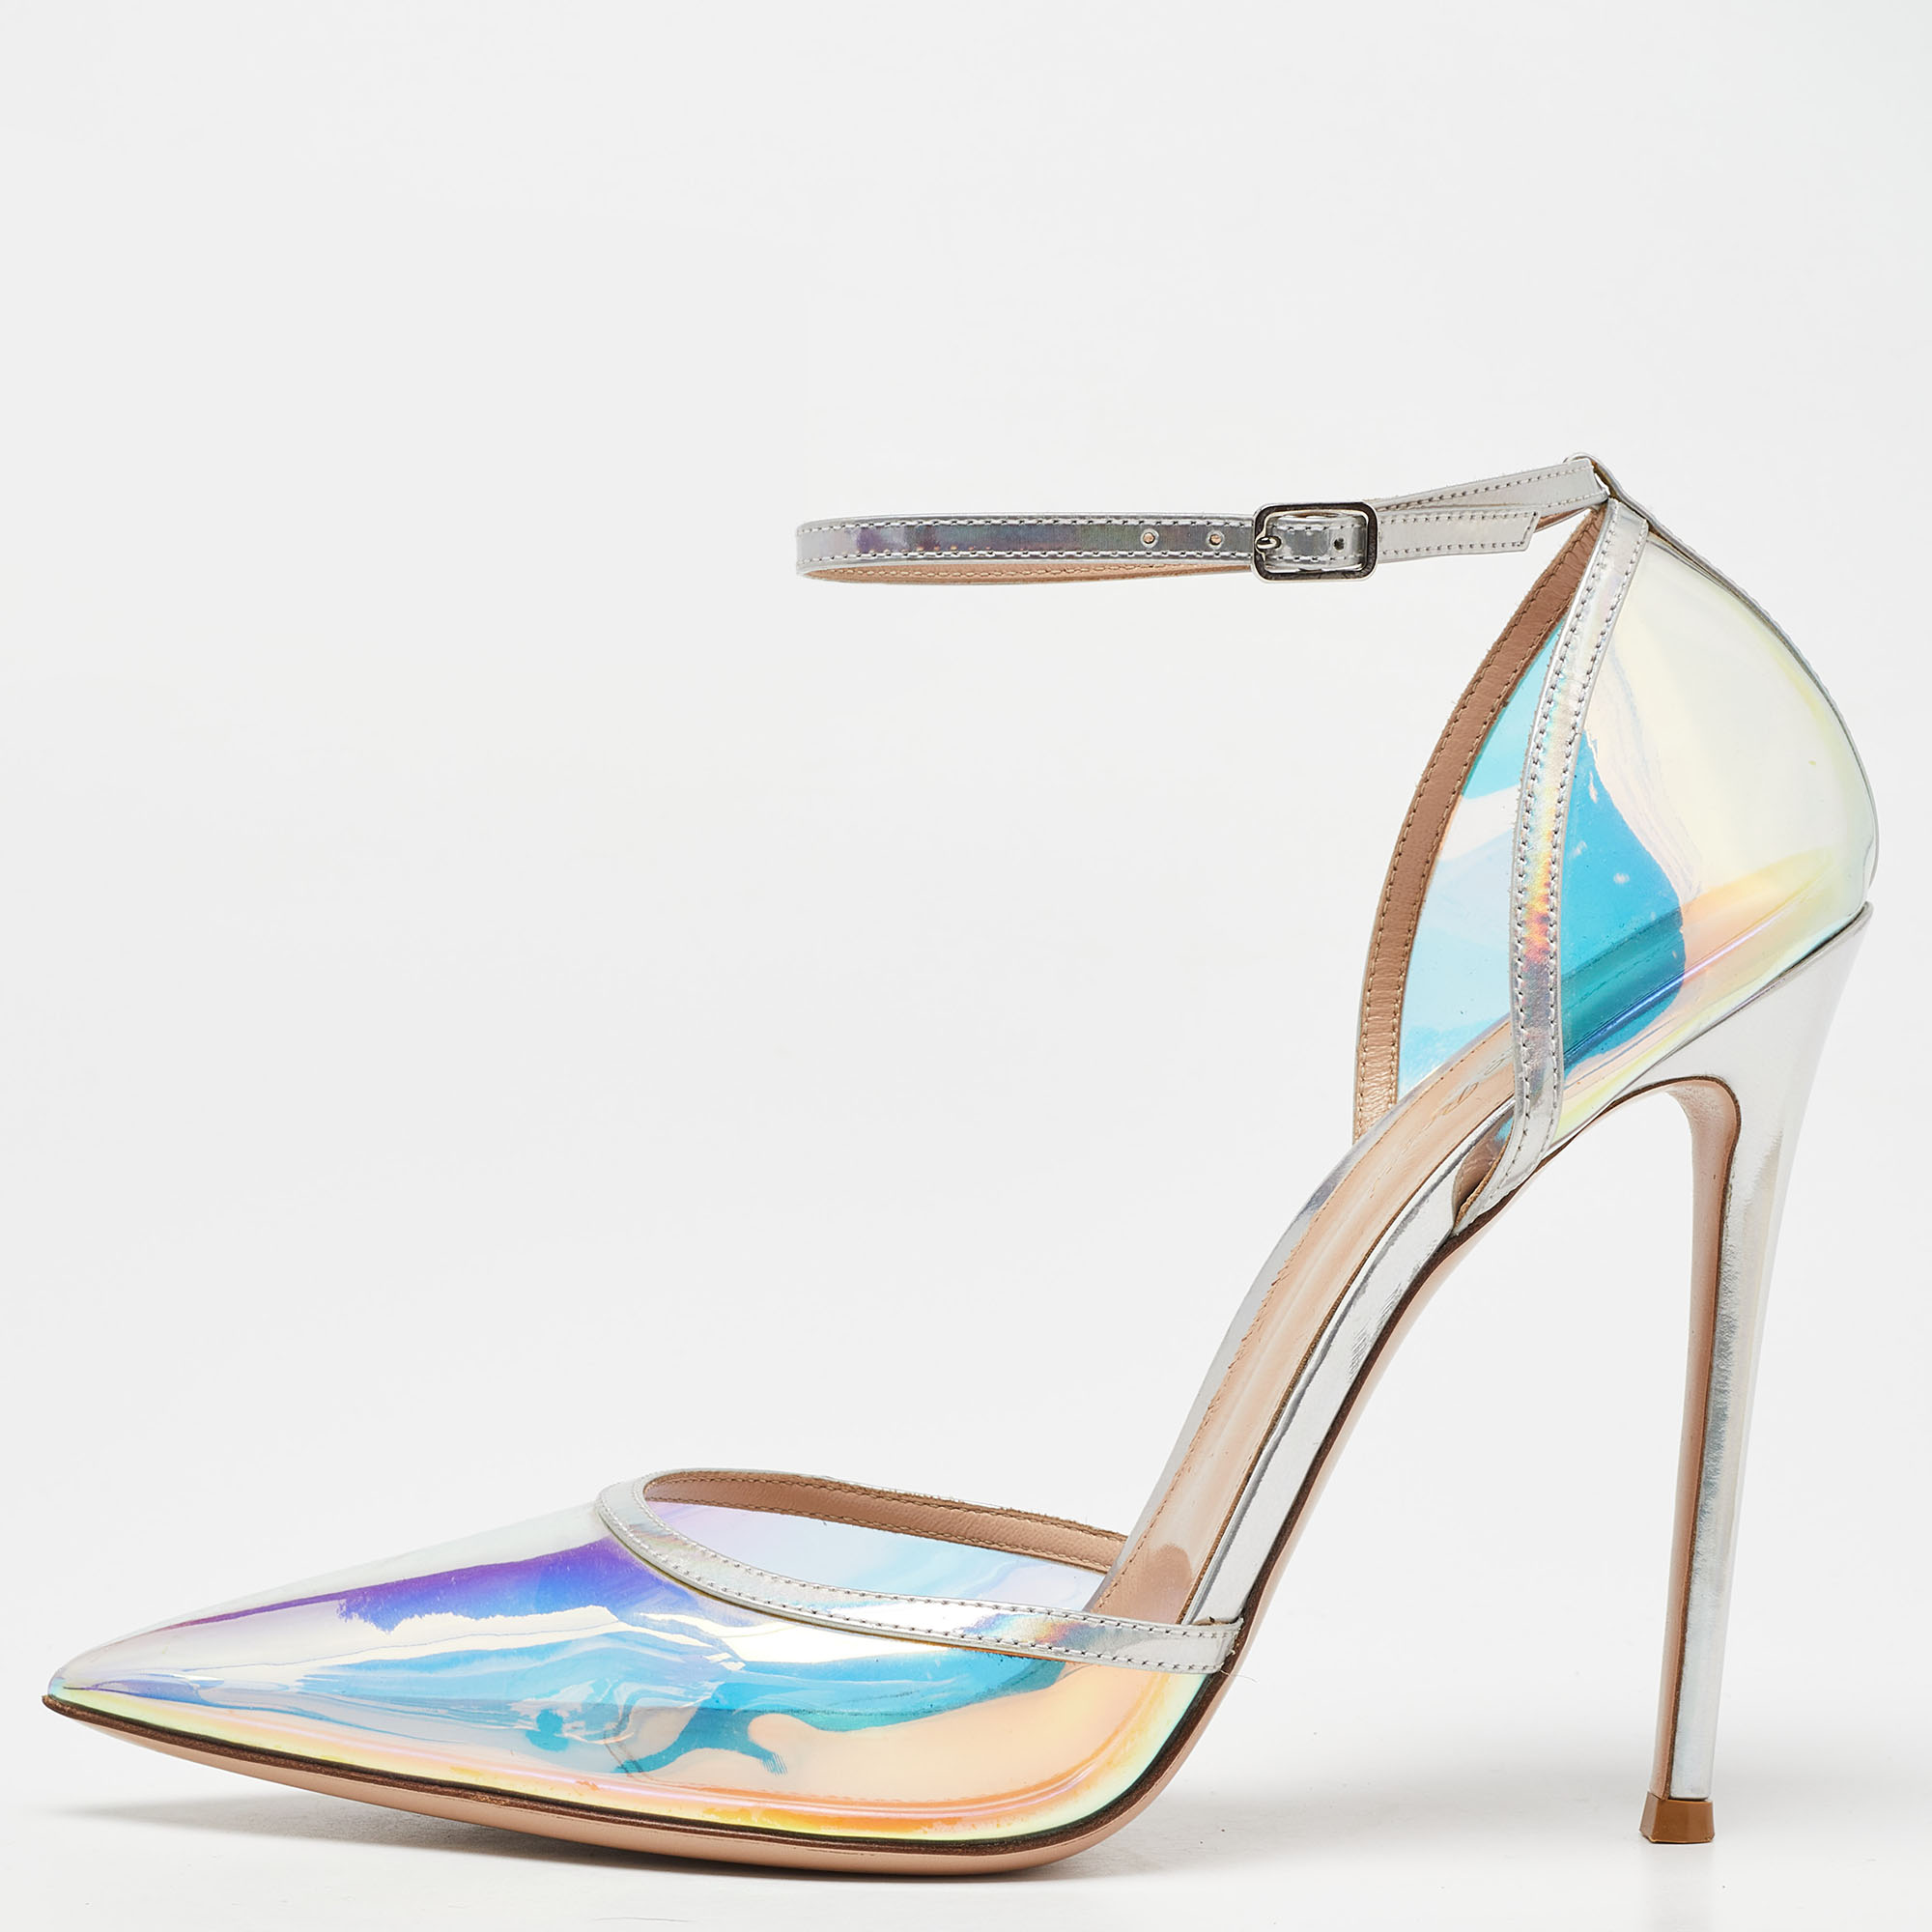 Gianvito Rossis timeless aesthetic and stellar craftsmanship in shoemaking is evident in these stunning pumps. Crafted from multicolor PVC and leather they are adorned with hologram design on the exterior and the pair is gracefully raised upon 12cm heels.